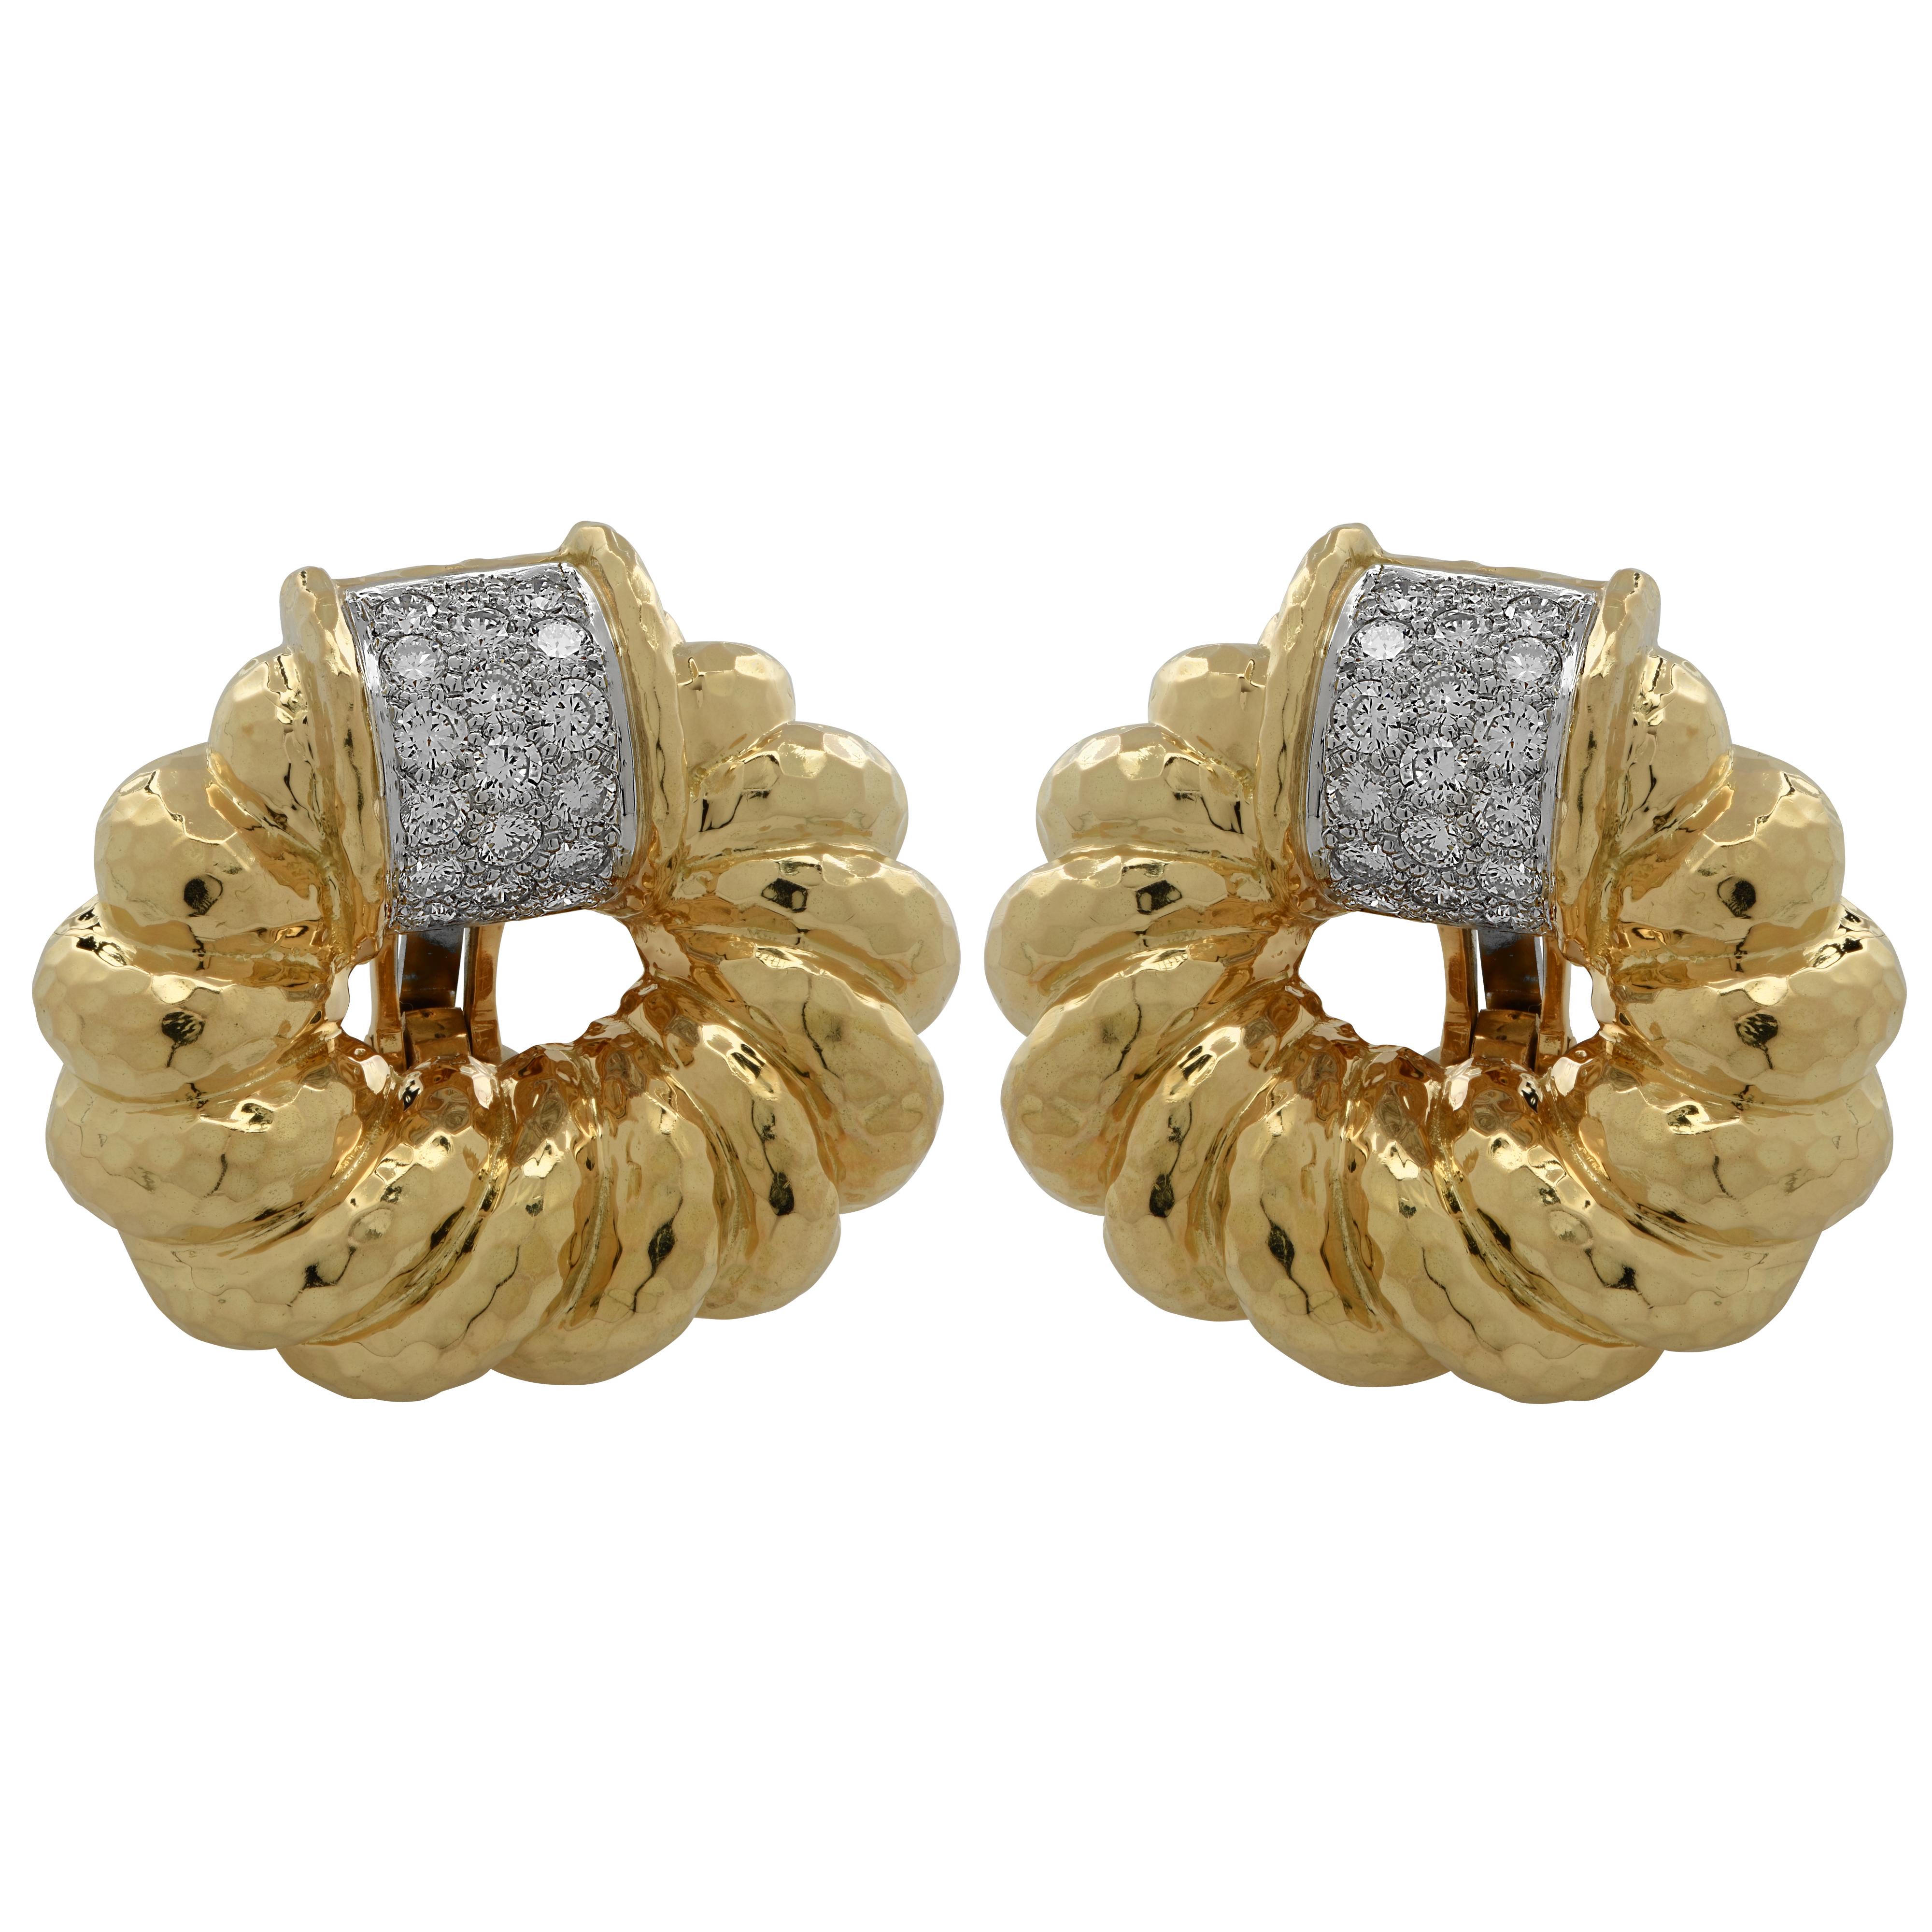 Sensational David Webb earrings crafted in platinum and 18 karat yellow gold, featuring 38 round brilliant cut diamonds weighing approximately 3.15 carats total, G color, VS clarity. Twisted rope hoops with a hammered finish are accented by diamonds